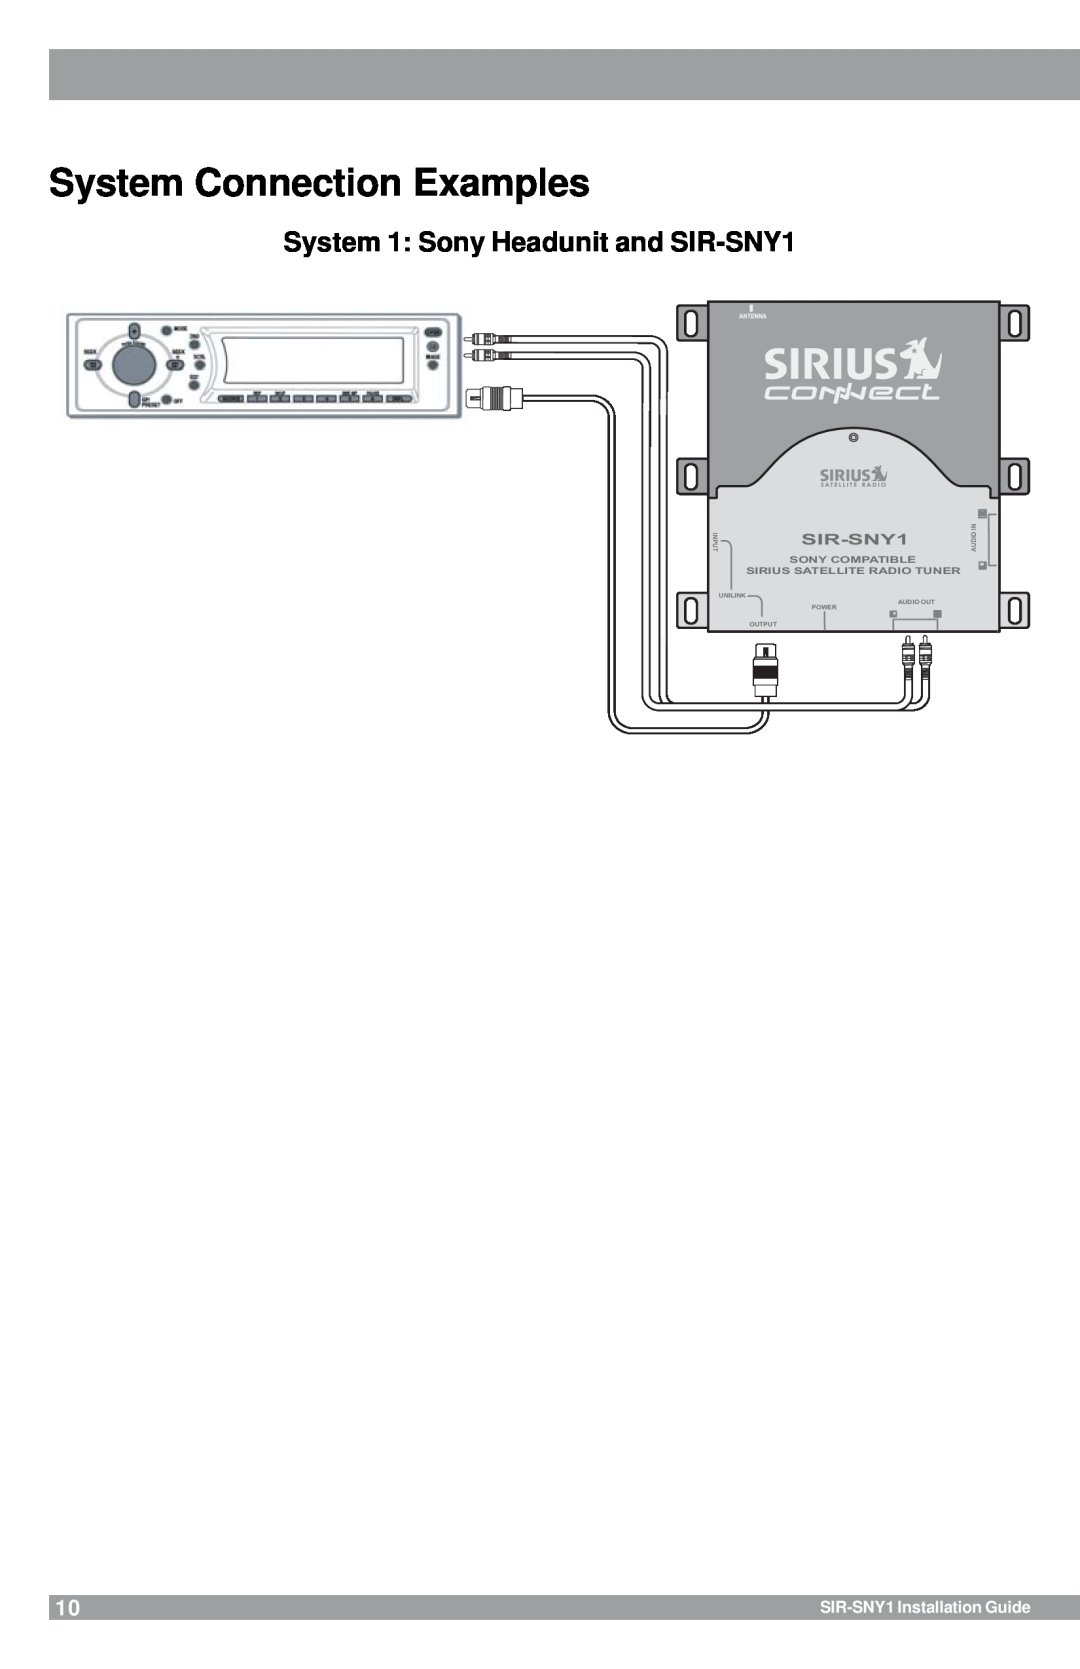 Sirius Satellite Radio System Connection Examples, SIR-SNY1Installation Guide, 6,561 , $ 8 ,1,2, 81,/,1 32, $8,2287 